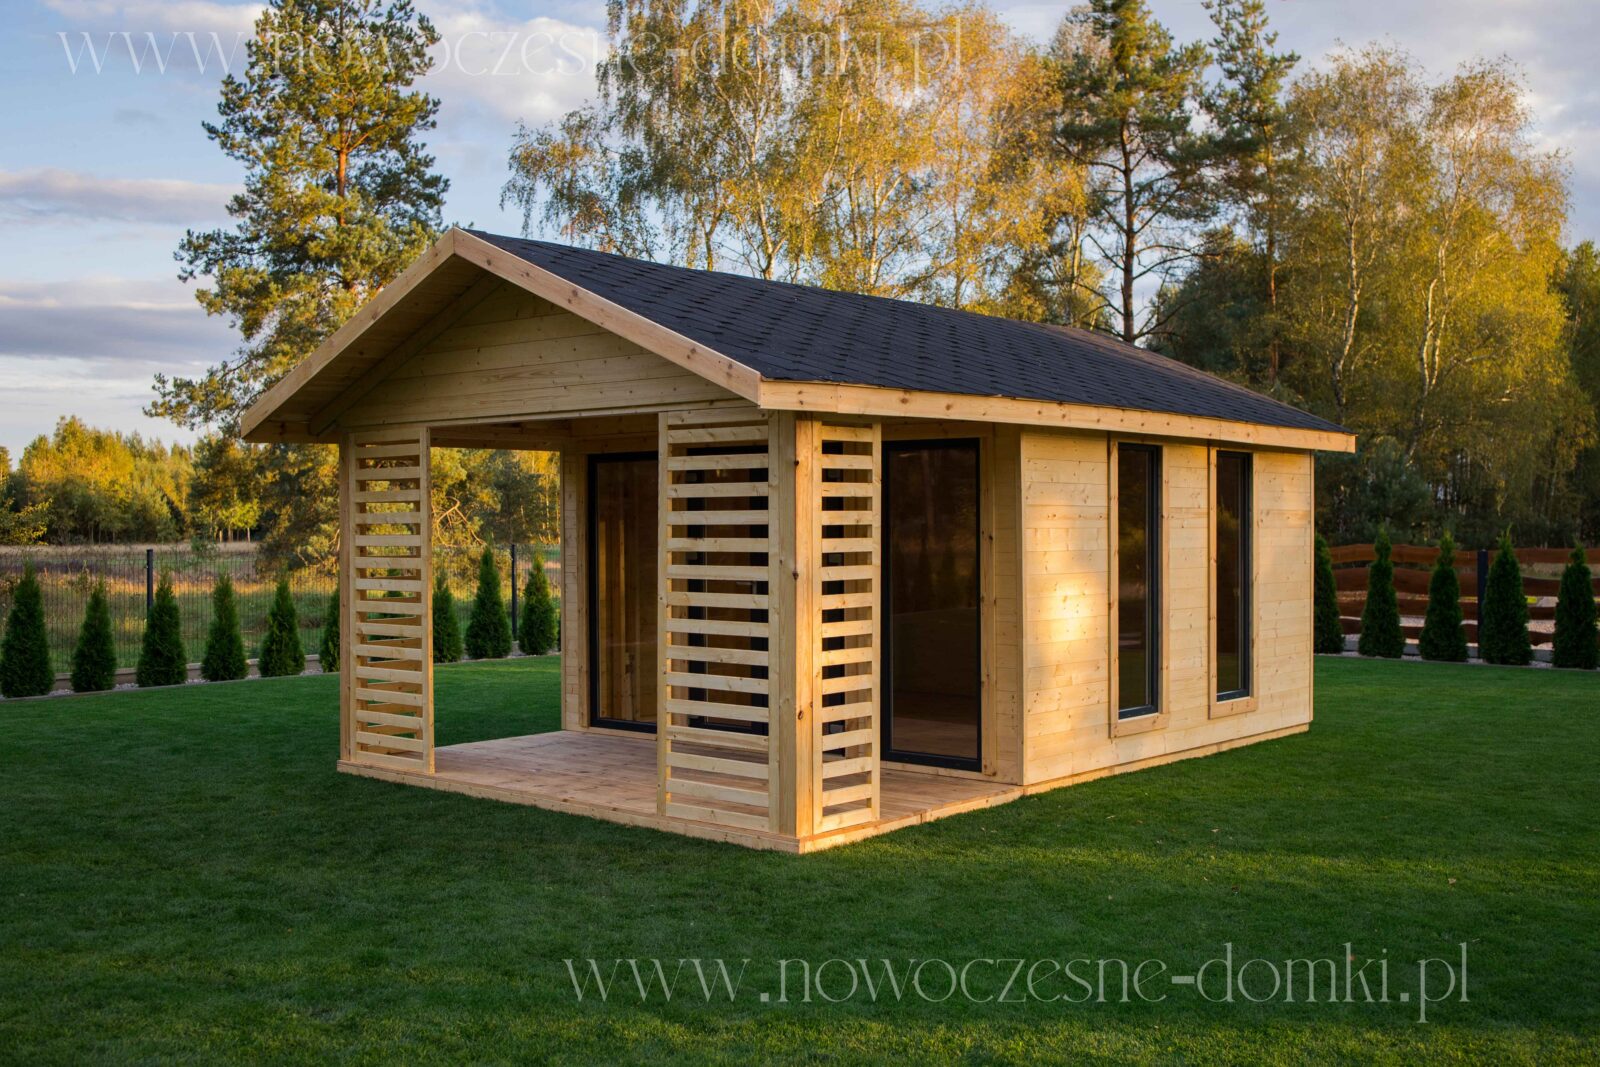 Wooden summer house with a spacious terrace - perfect place for a summer getaway.